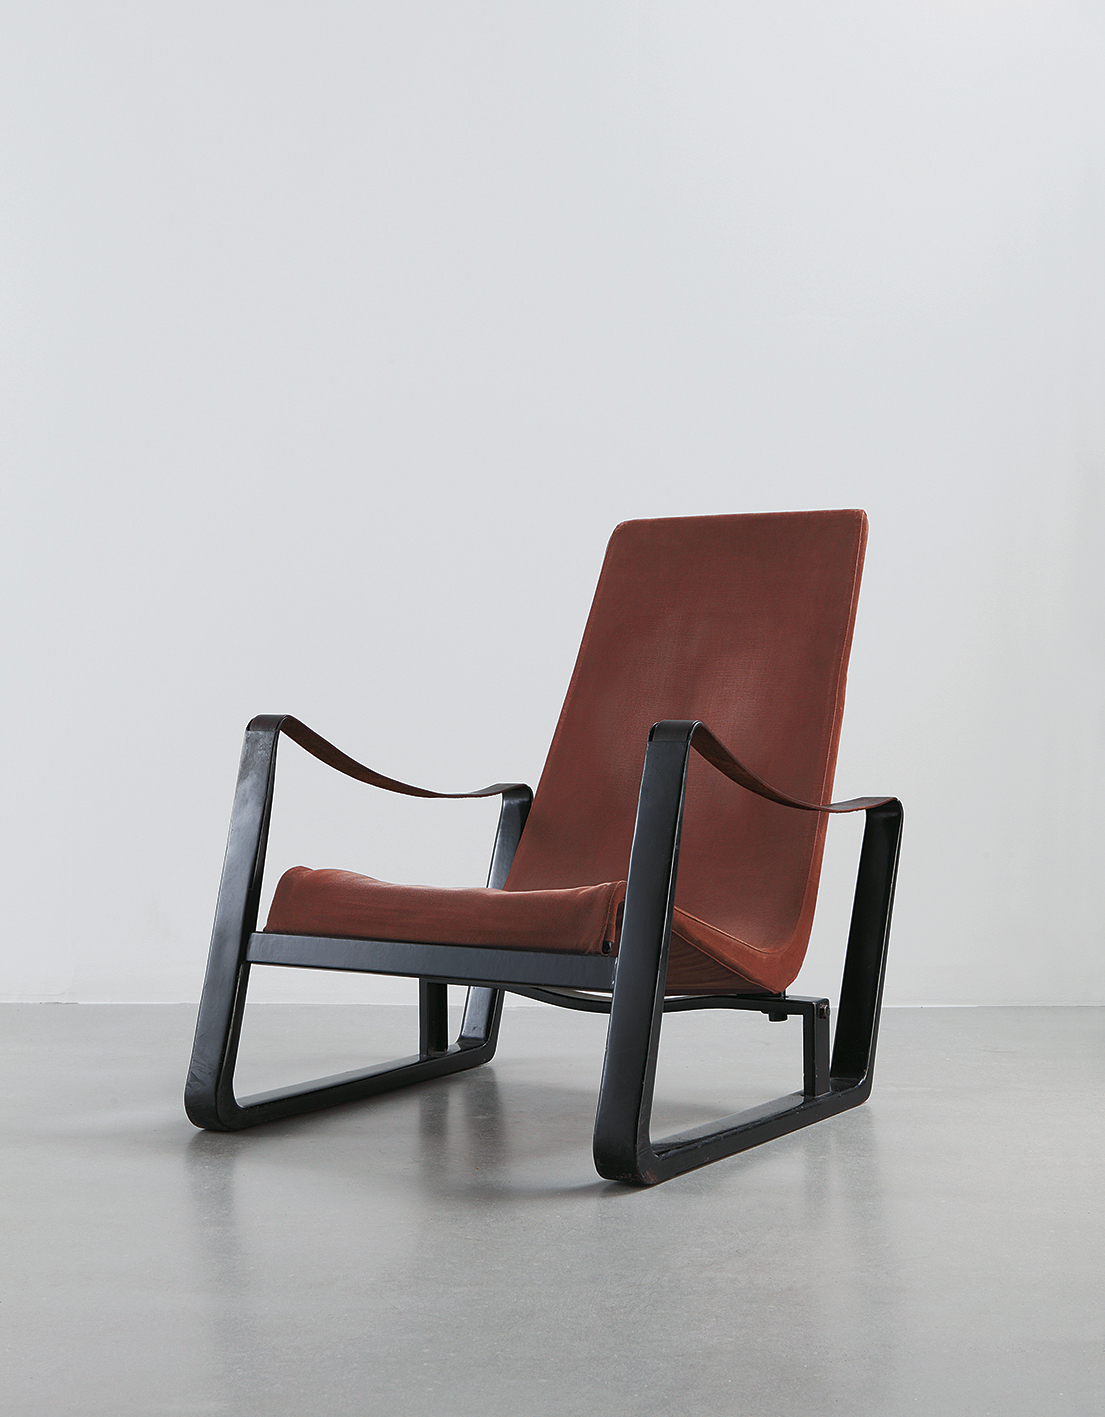 Cité armchair, variant with leather armrest straps that pass through closed vertical ducts, ca. 1933.